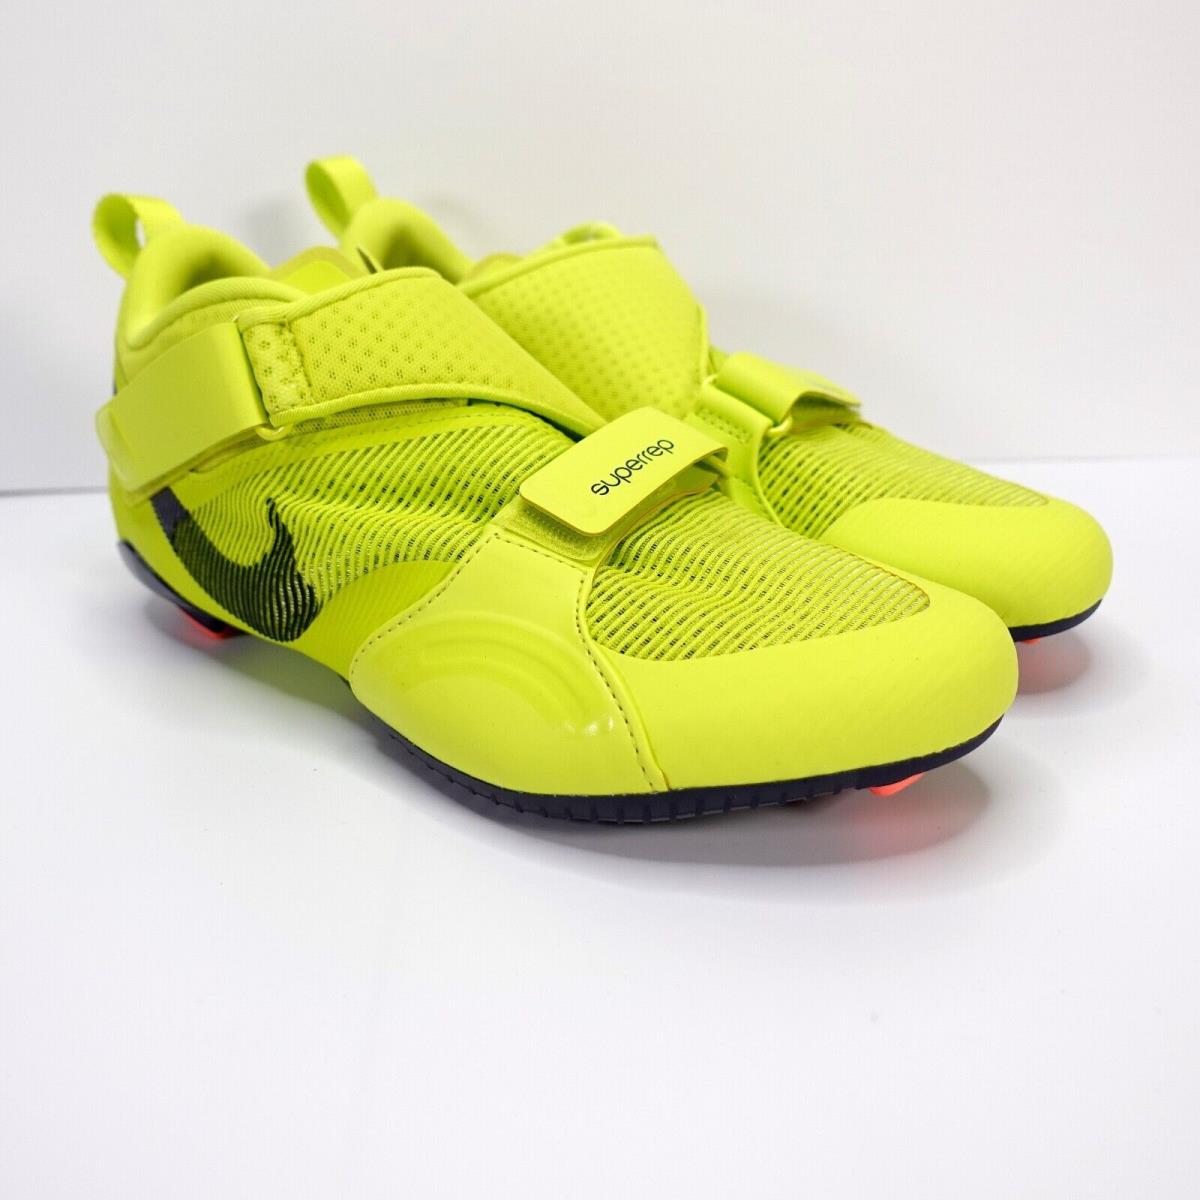 Nike Superrep Cycle Indoor Cycling Shoe Neon Yellow Mens Size 8 CW2191-348 | 194498180976 - Nike shoes Superrep Cycle Yellow , Cyber/Blackened Blue Manufacturer | SporTipTop